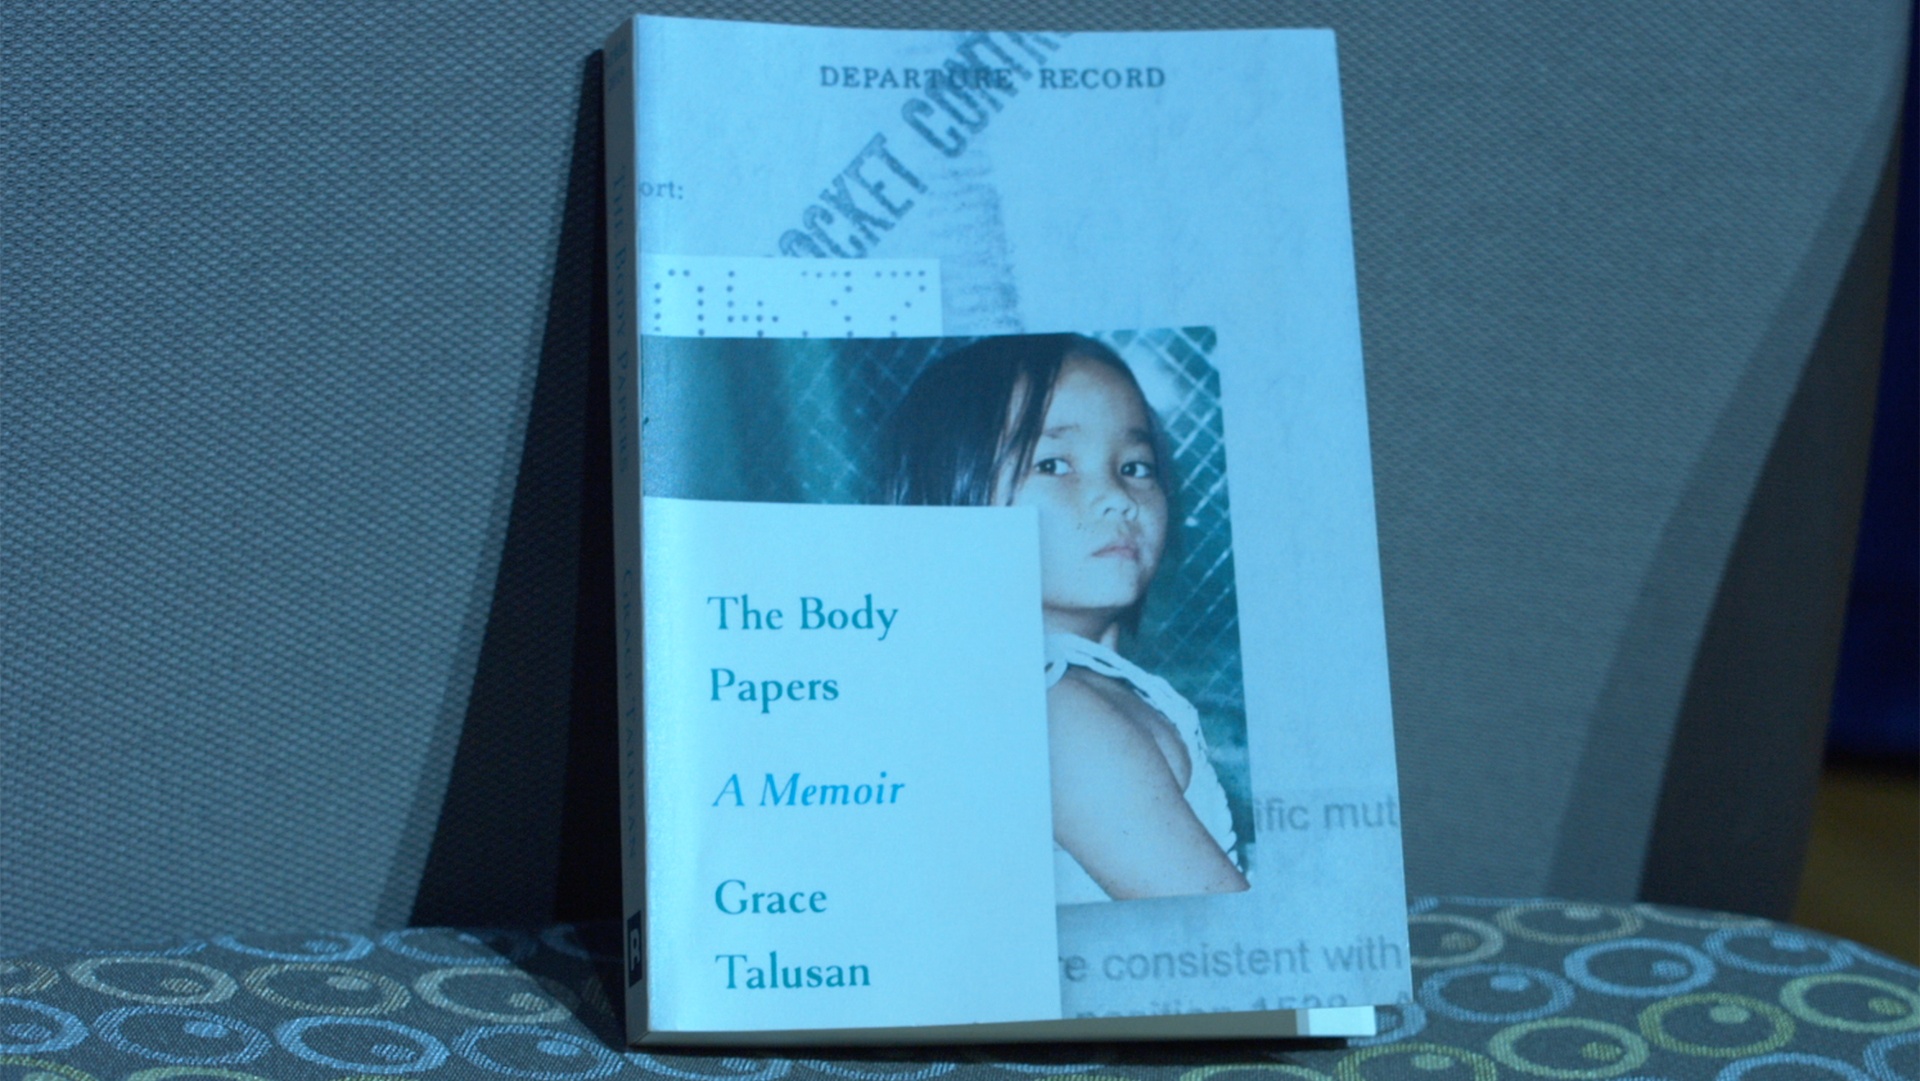 Grace Talusan's photo on the cover of her book, “The Body Papers” 